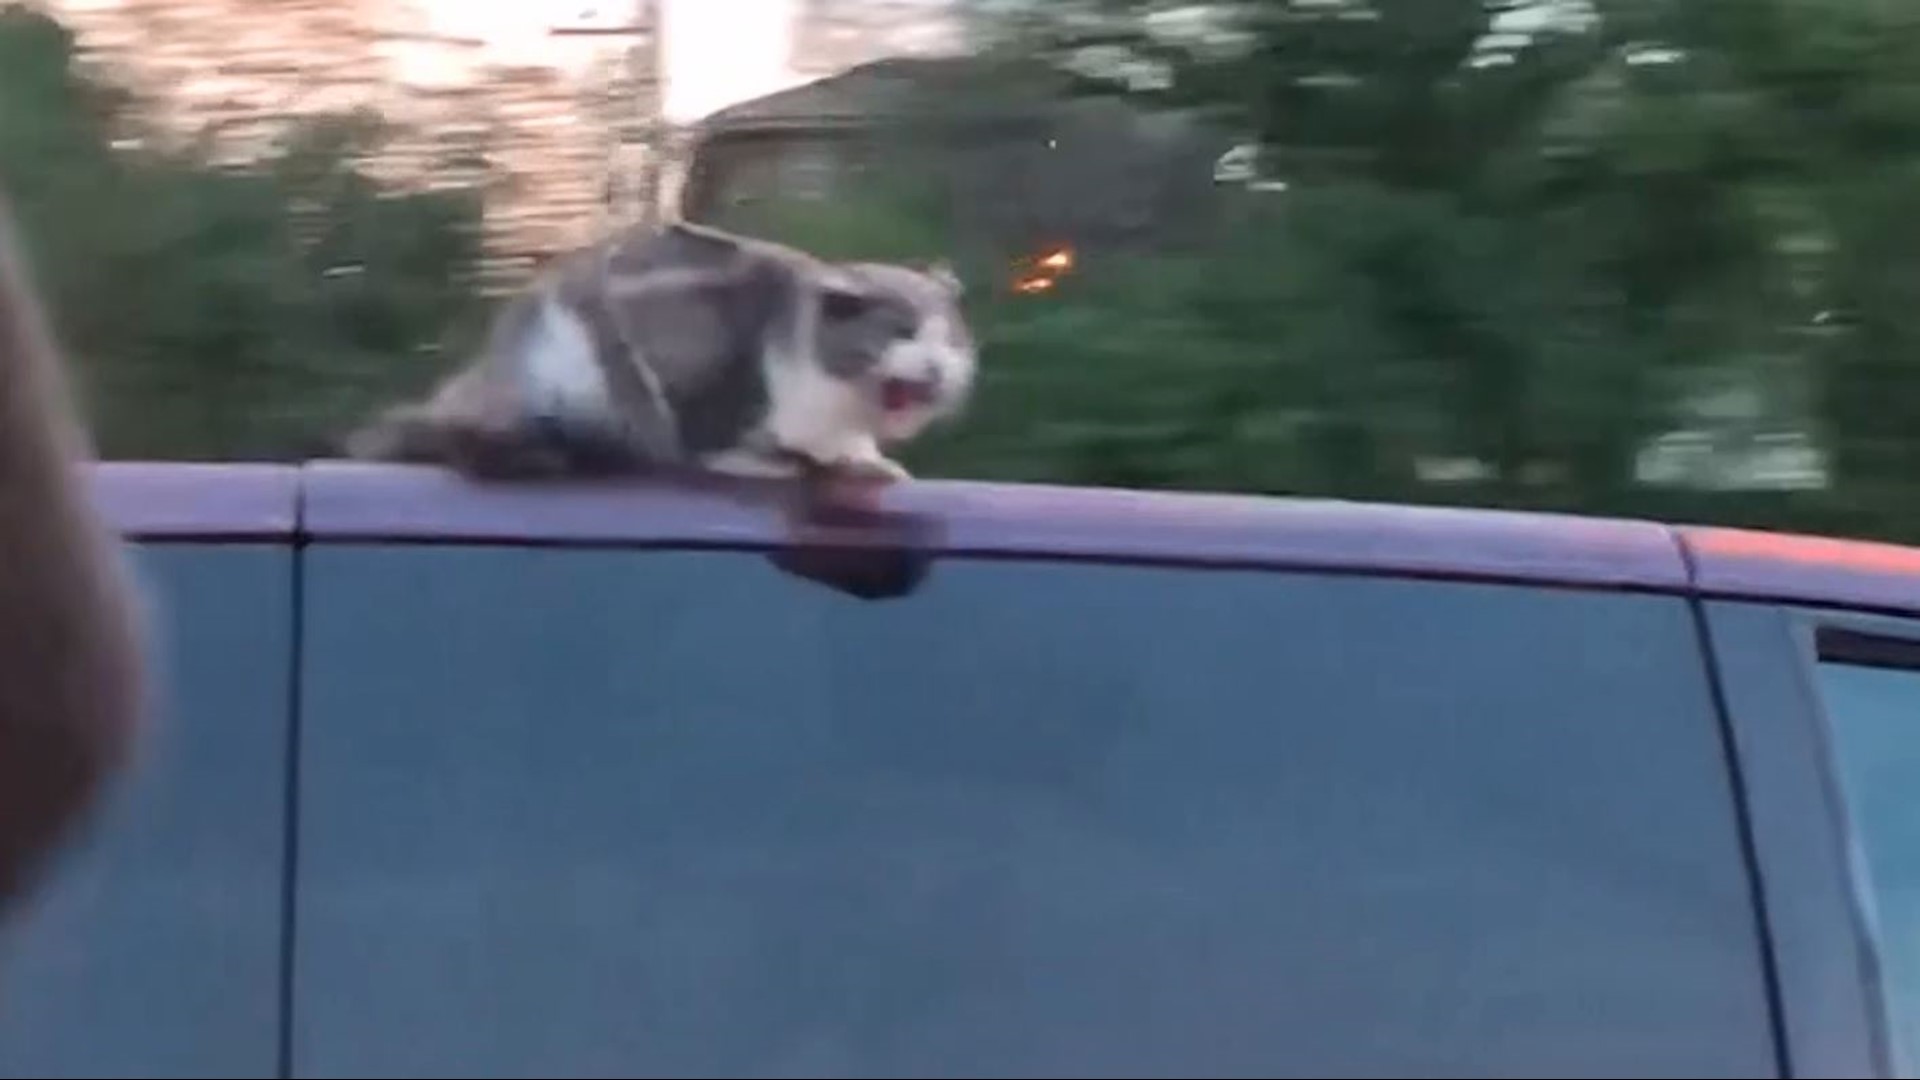 Wild video shows cat hanging onto van's roof at 60 mph